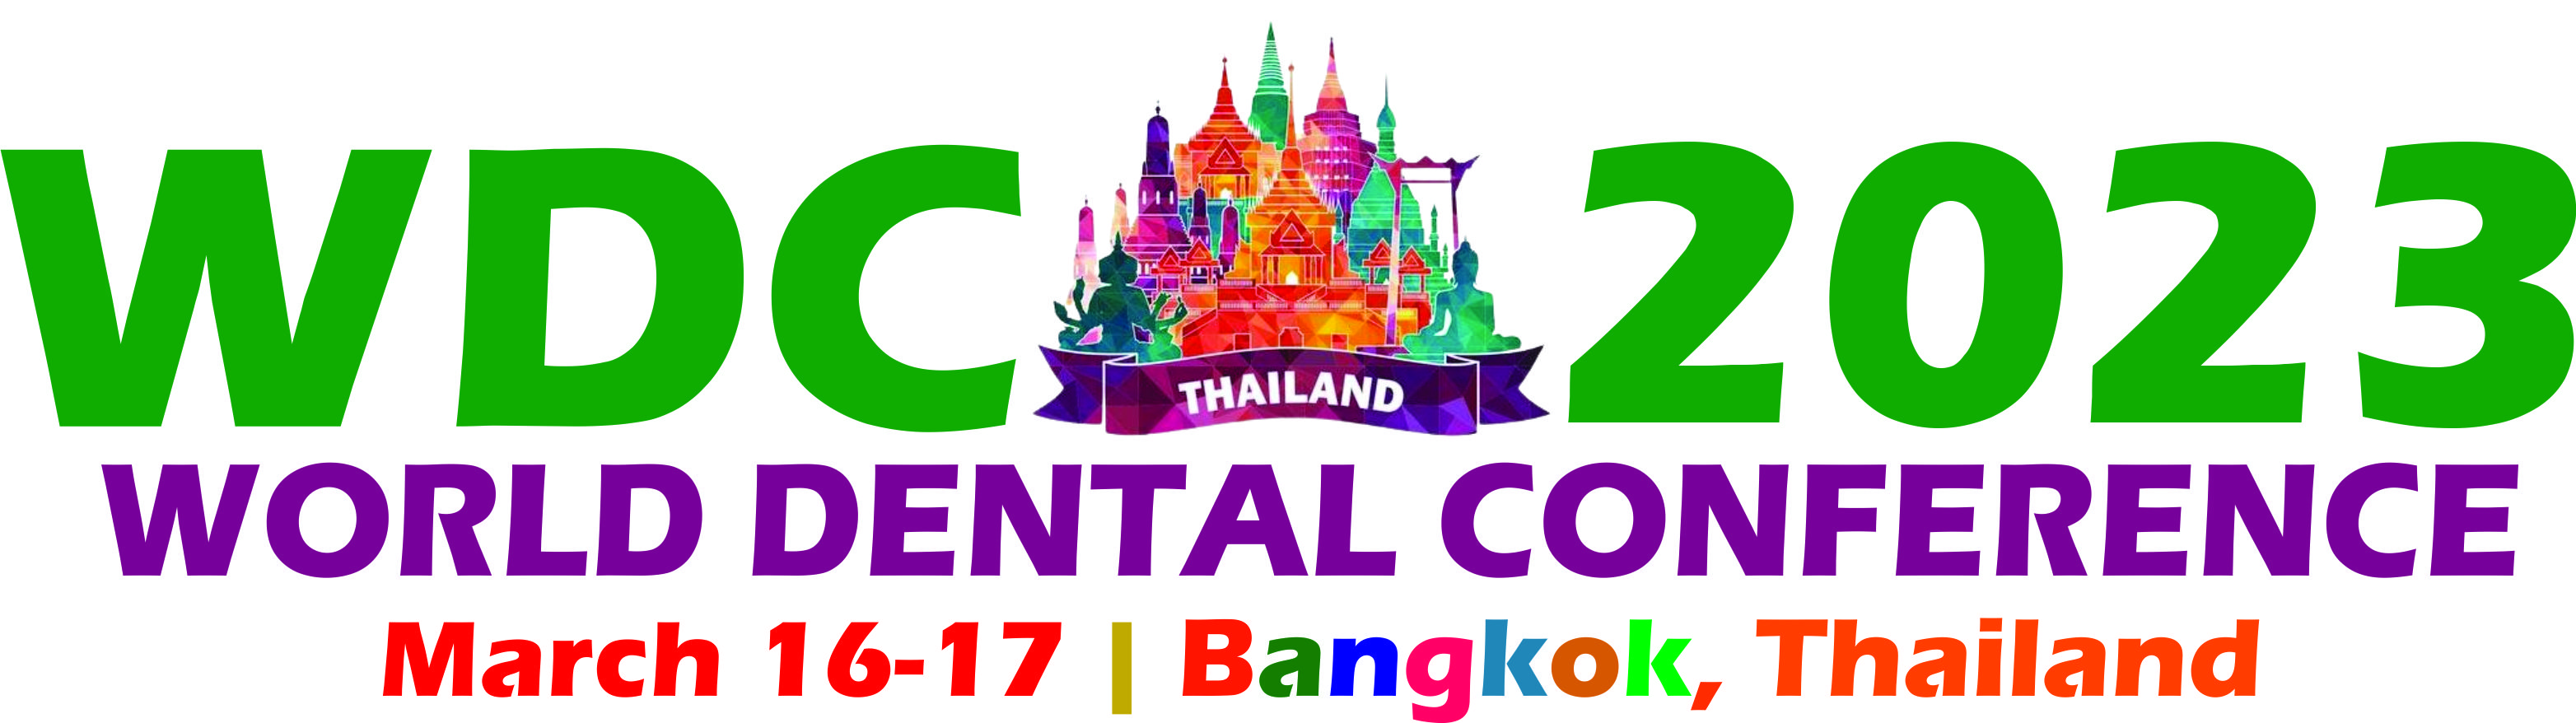 8th World Dental Conference (WDC 2022)